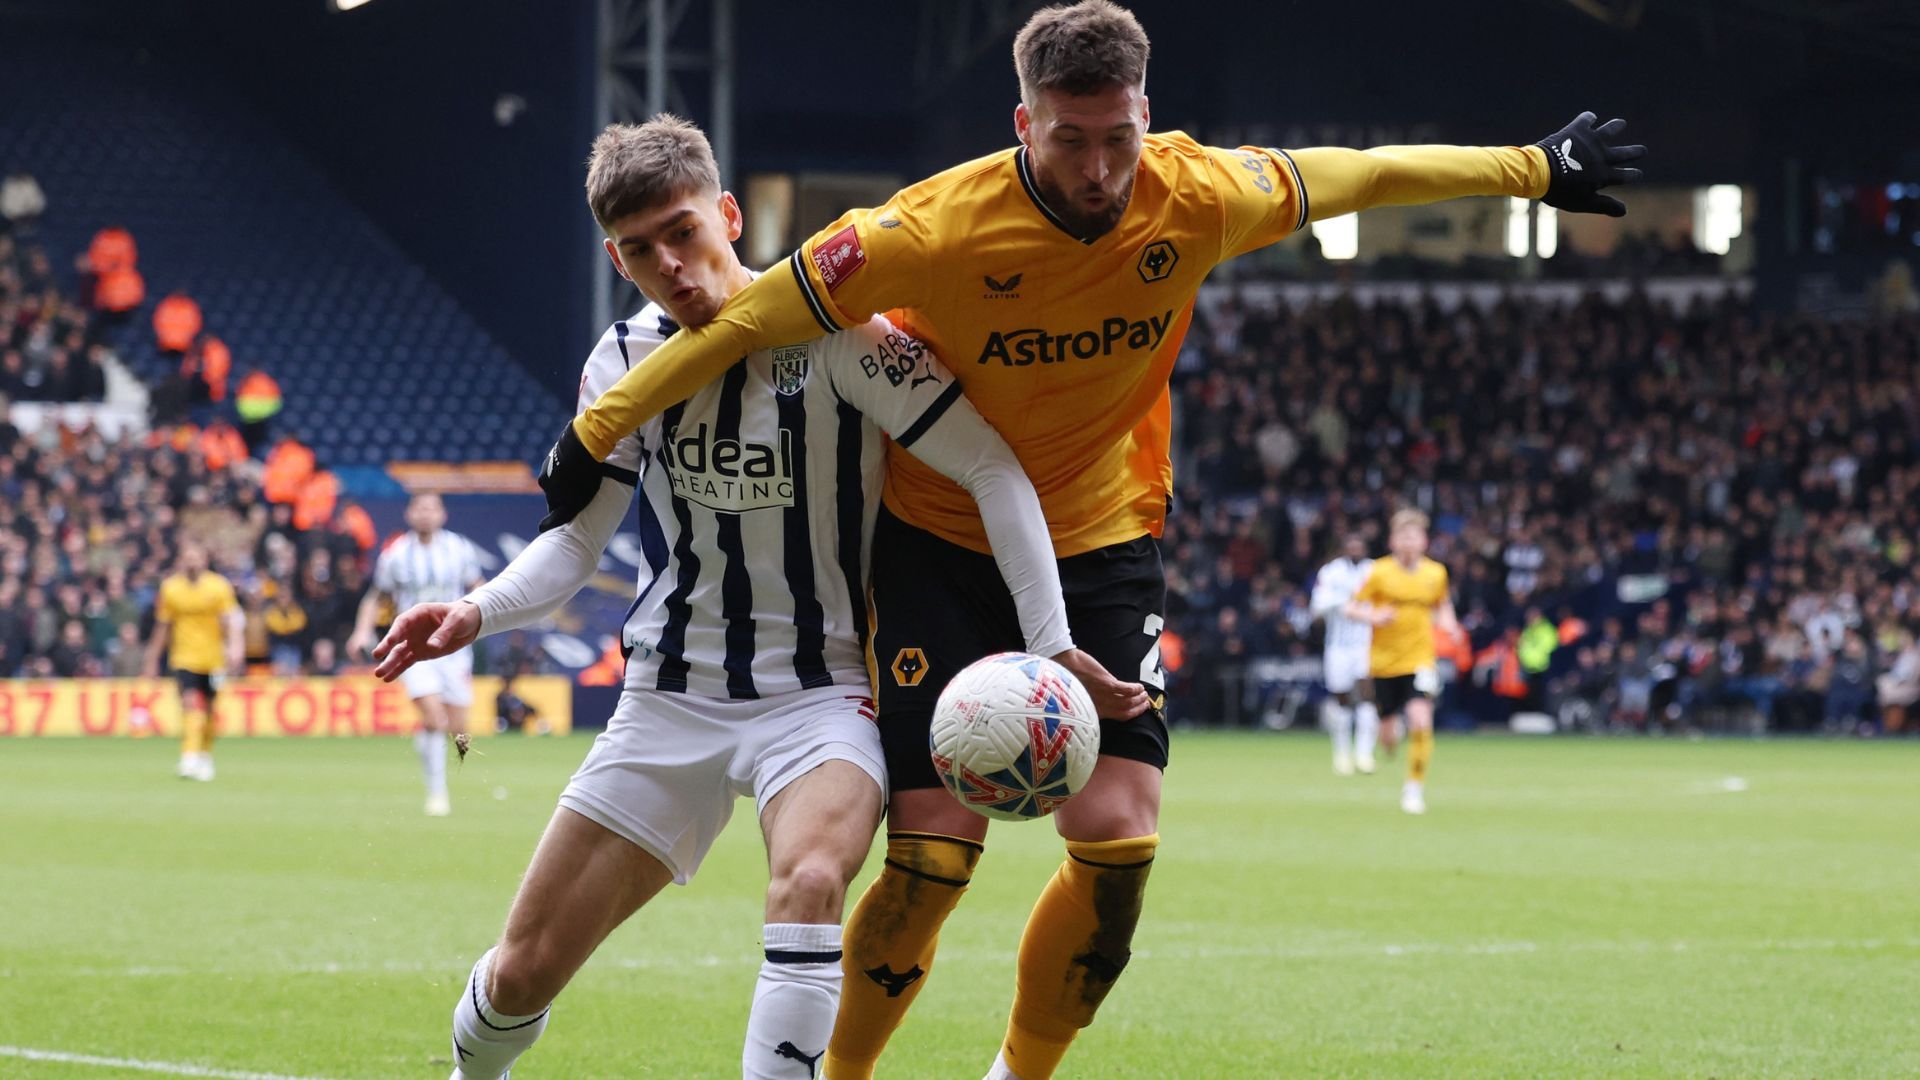 West Bromwich Albion's Tom Fellows in action with Wolverhampton Wanderers' Matt Doherty